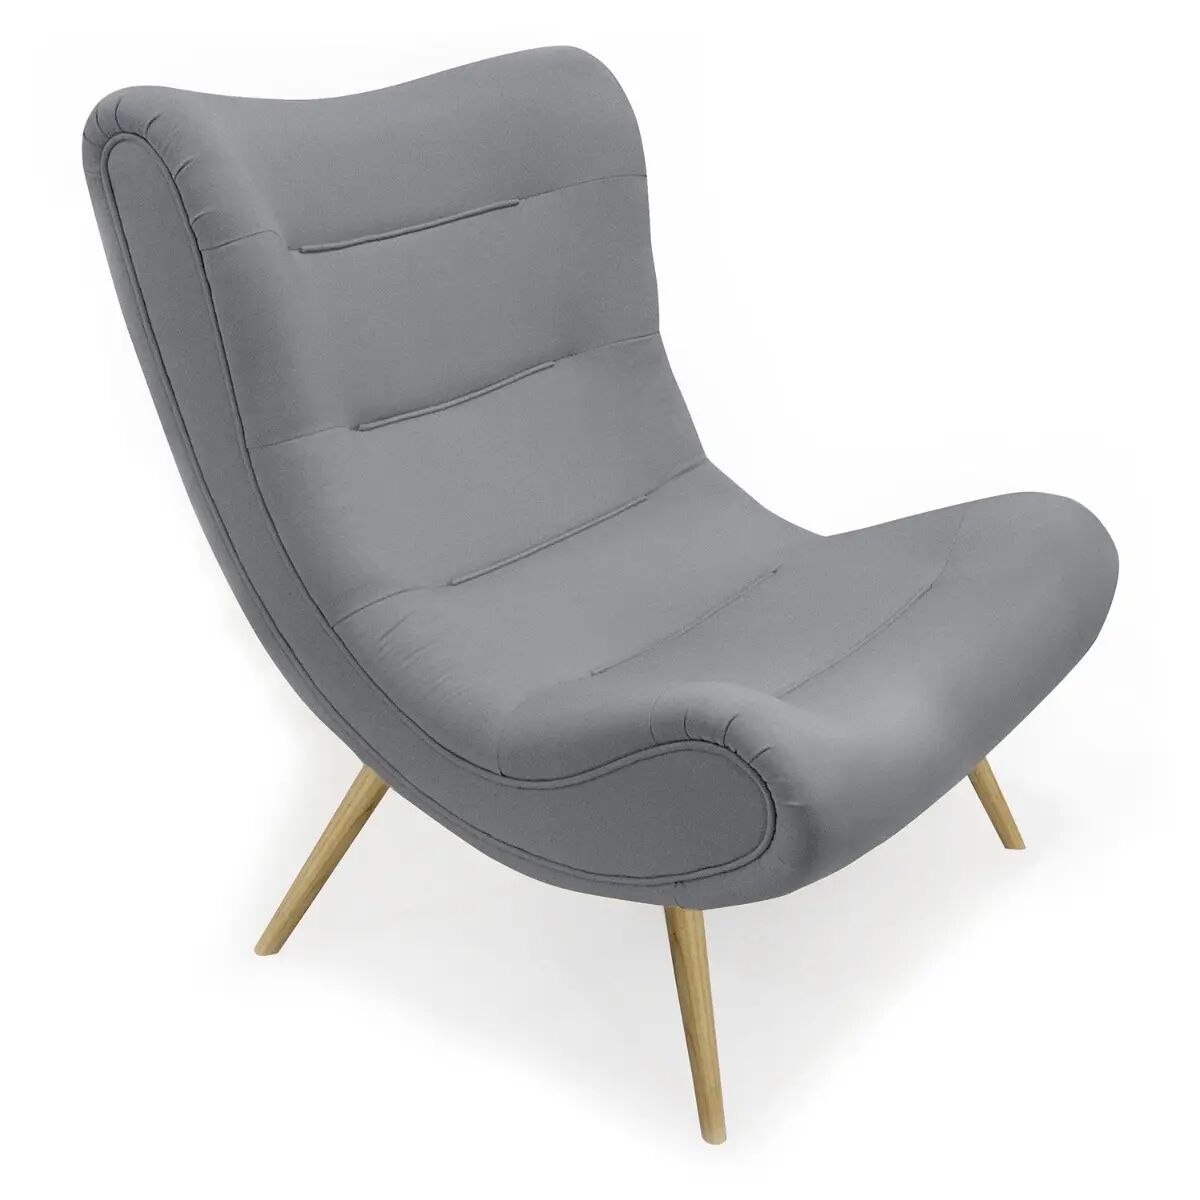 MENZZO Fauteuil scandinave Romilly Tissu Gris clair